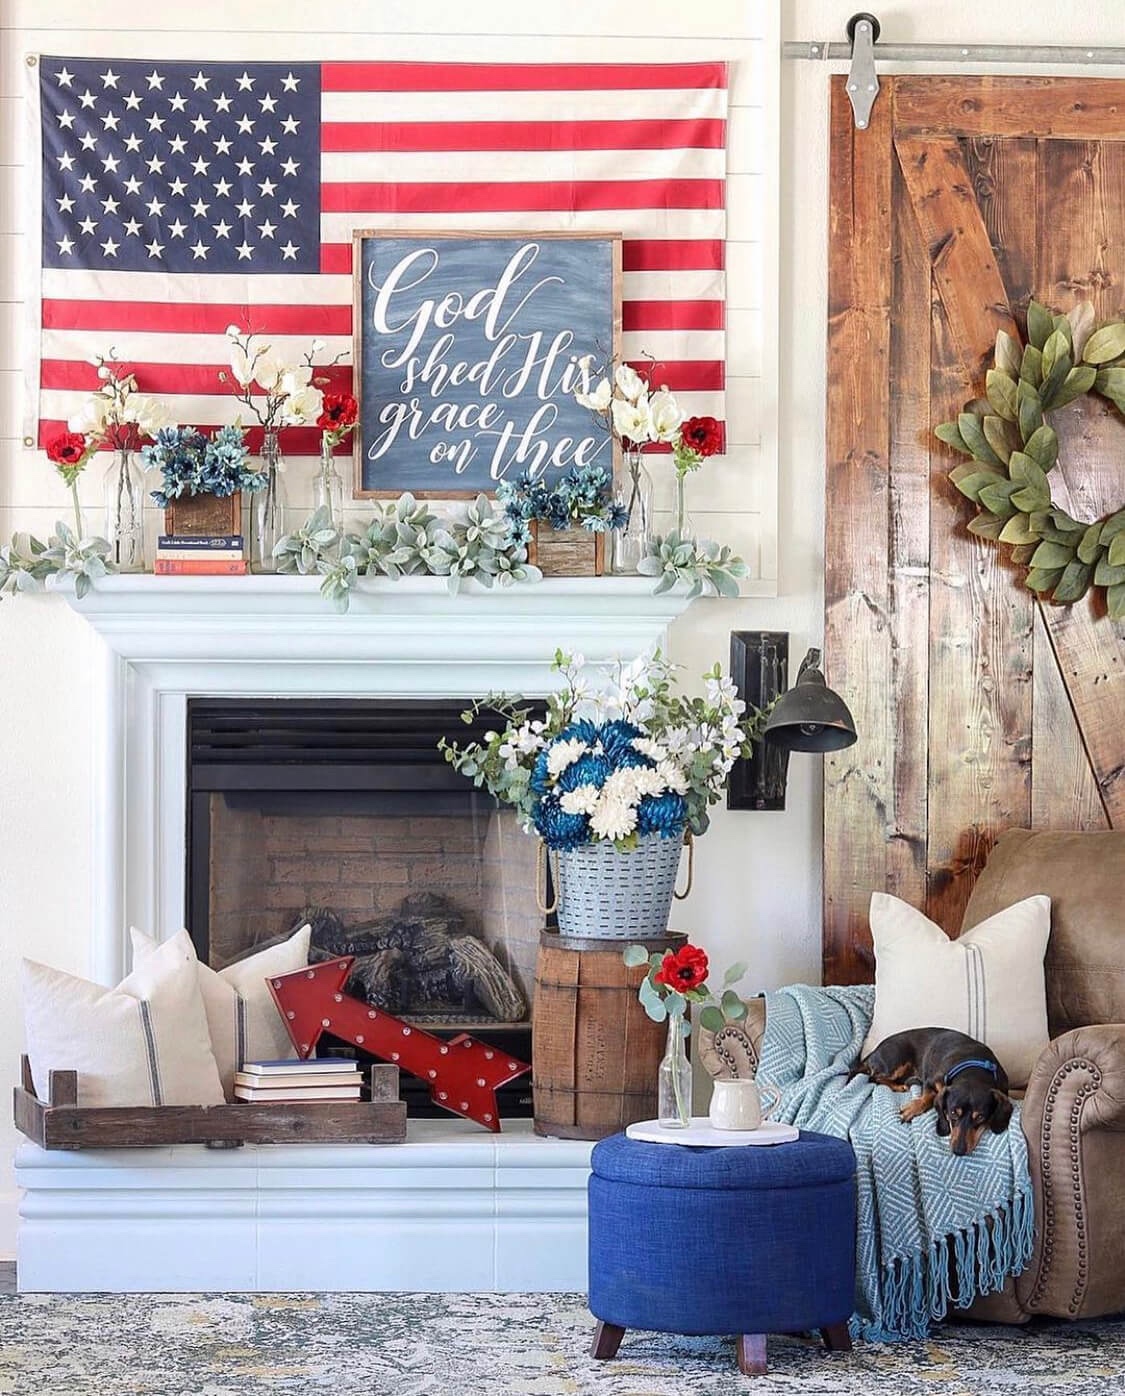 A mantel has a US flag, a God Shed his Grace on thee signs, and patriotic decor.